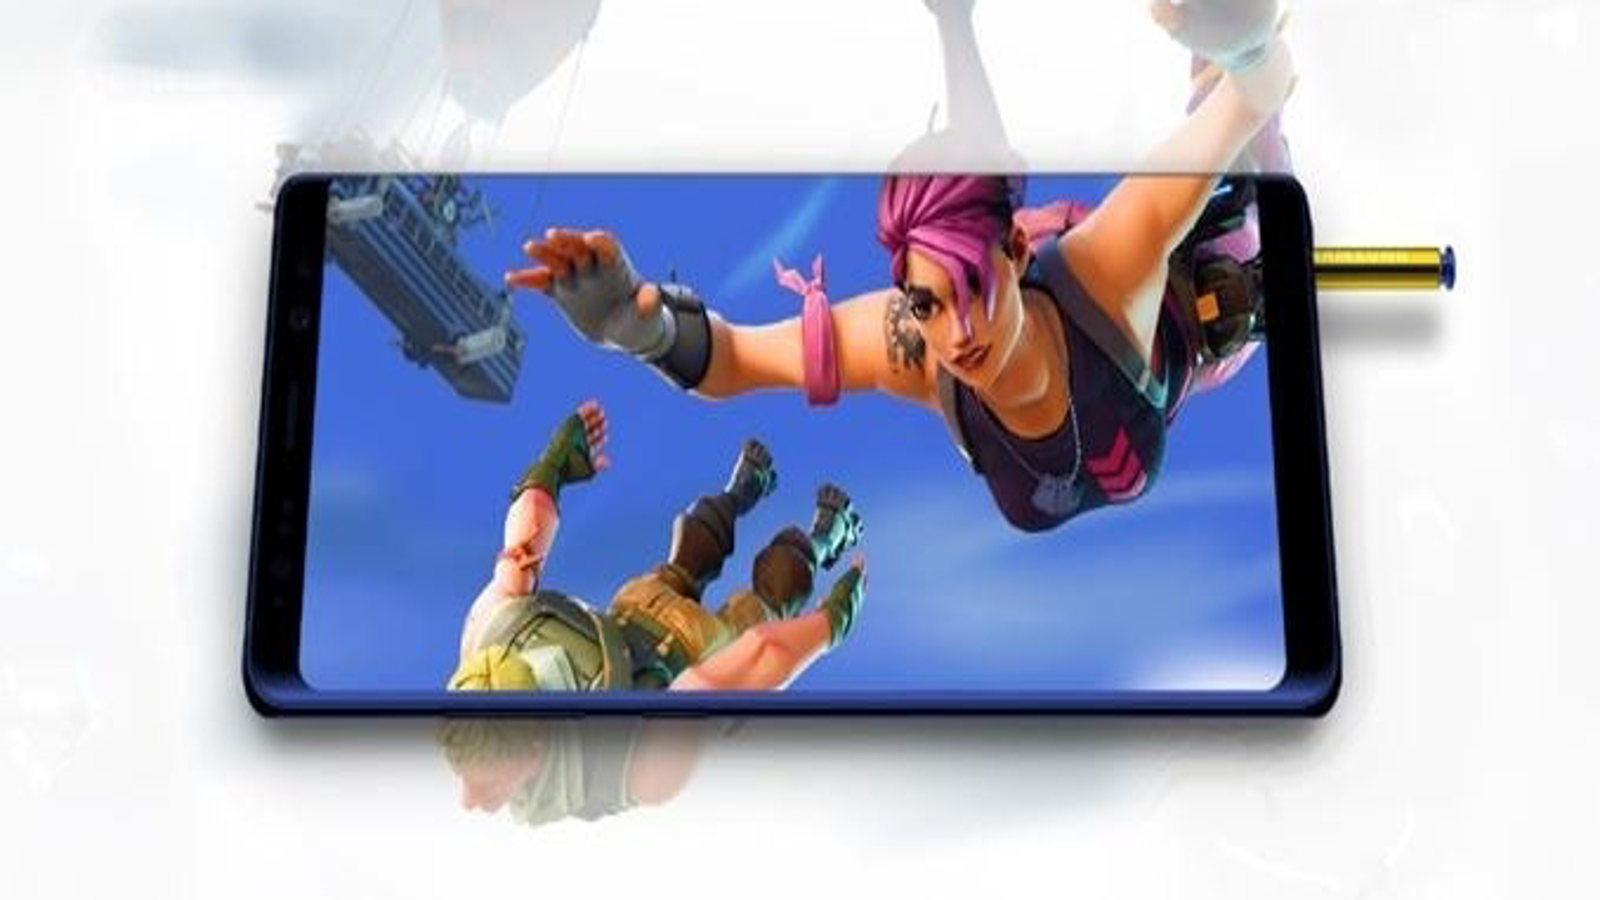 Fortnite Maker Epic Games Sues Google for Anti-Competitive Behaviour,  Blocking OnePlus From Pre-Installing Its App